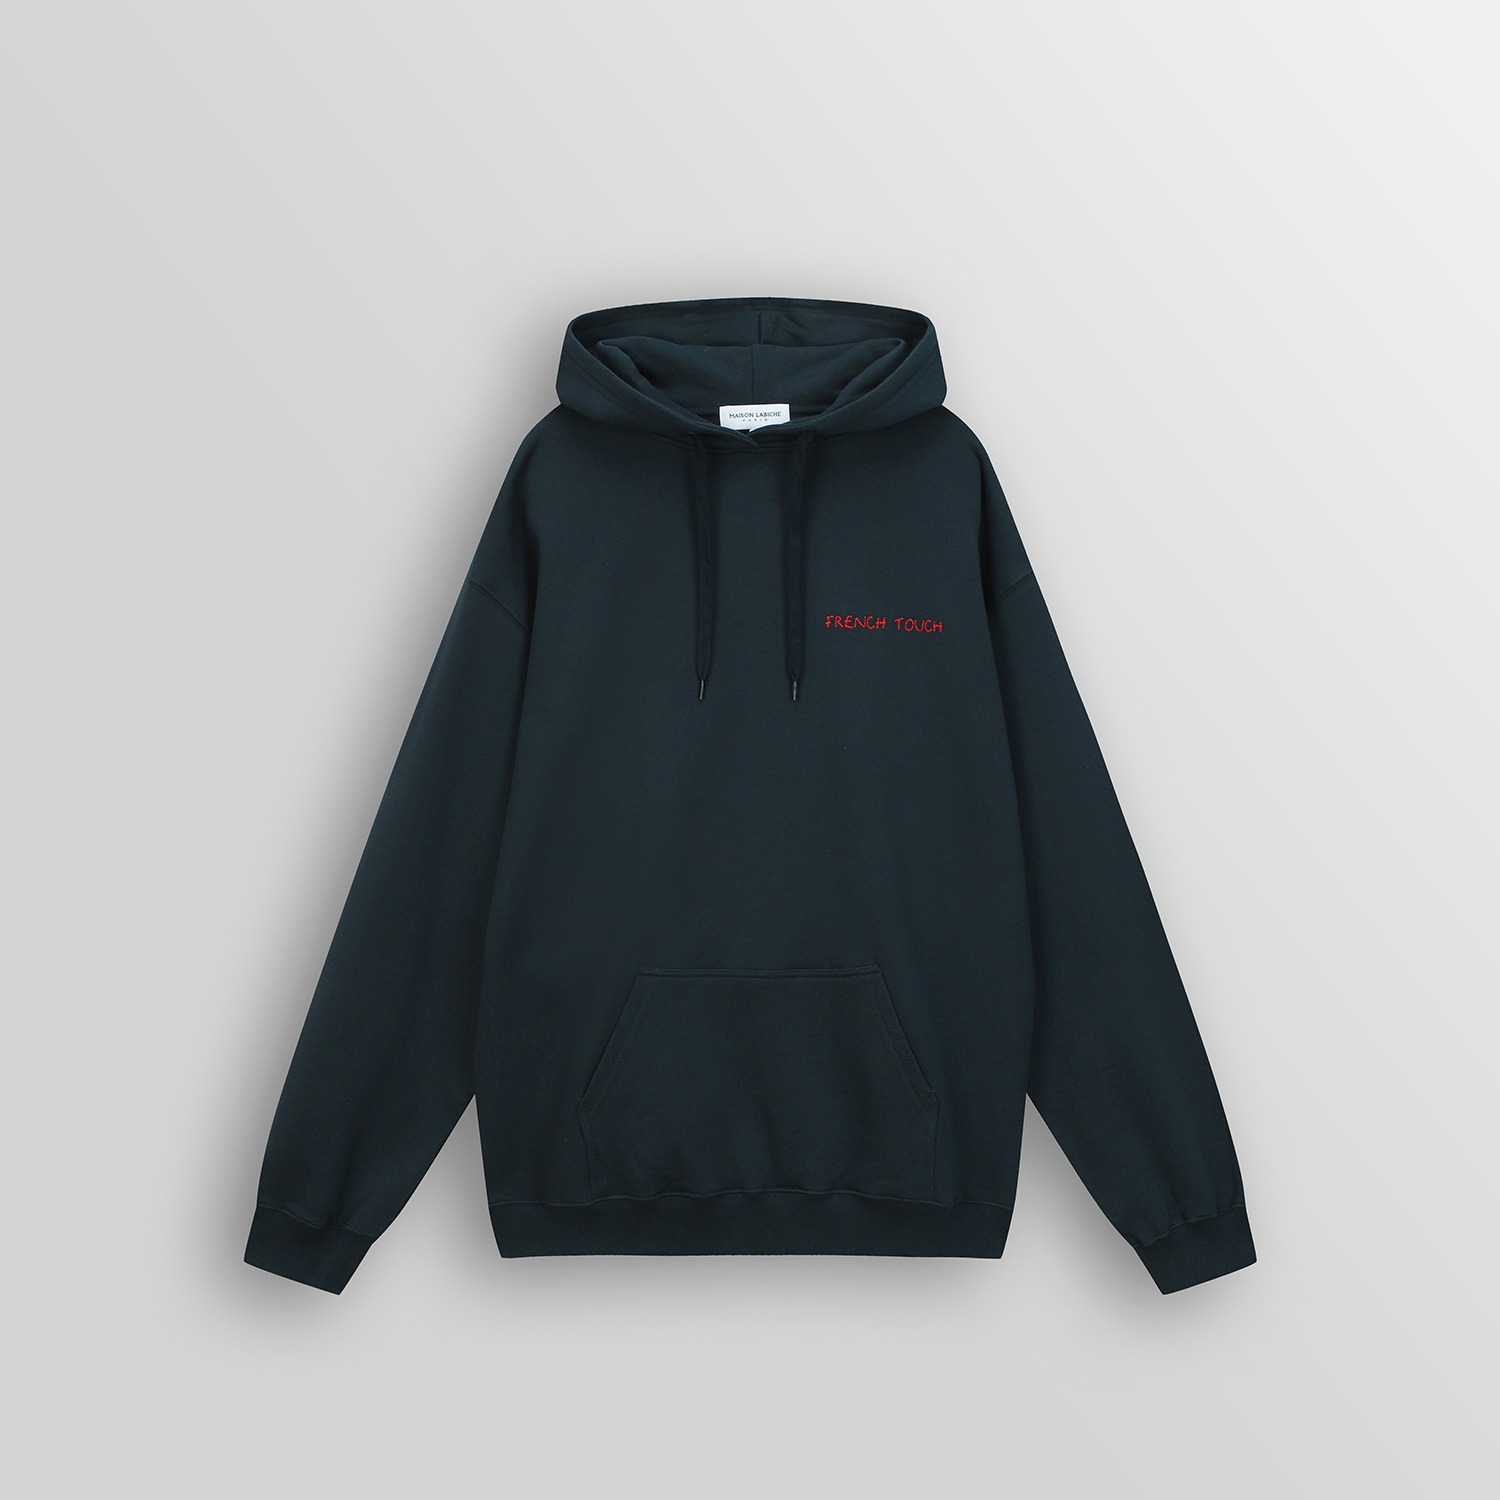 FRENCH TOUCH RÉAUMUR HOODIE